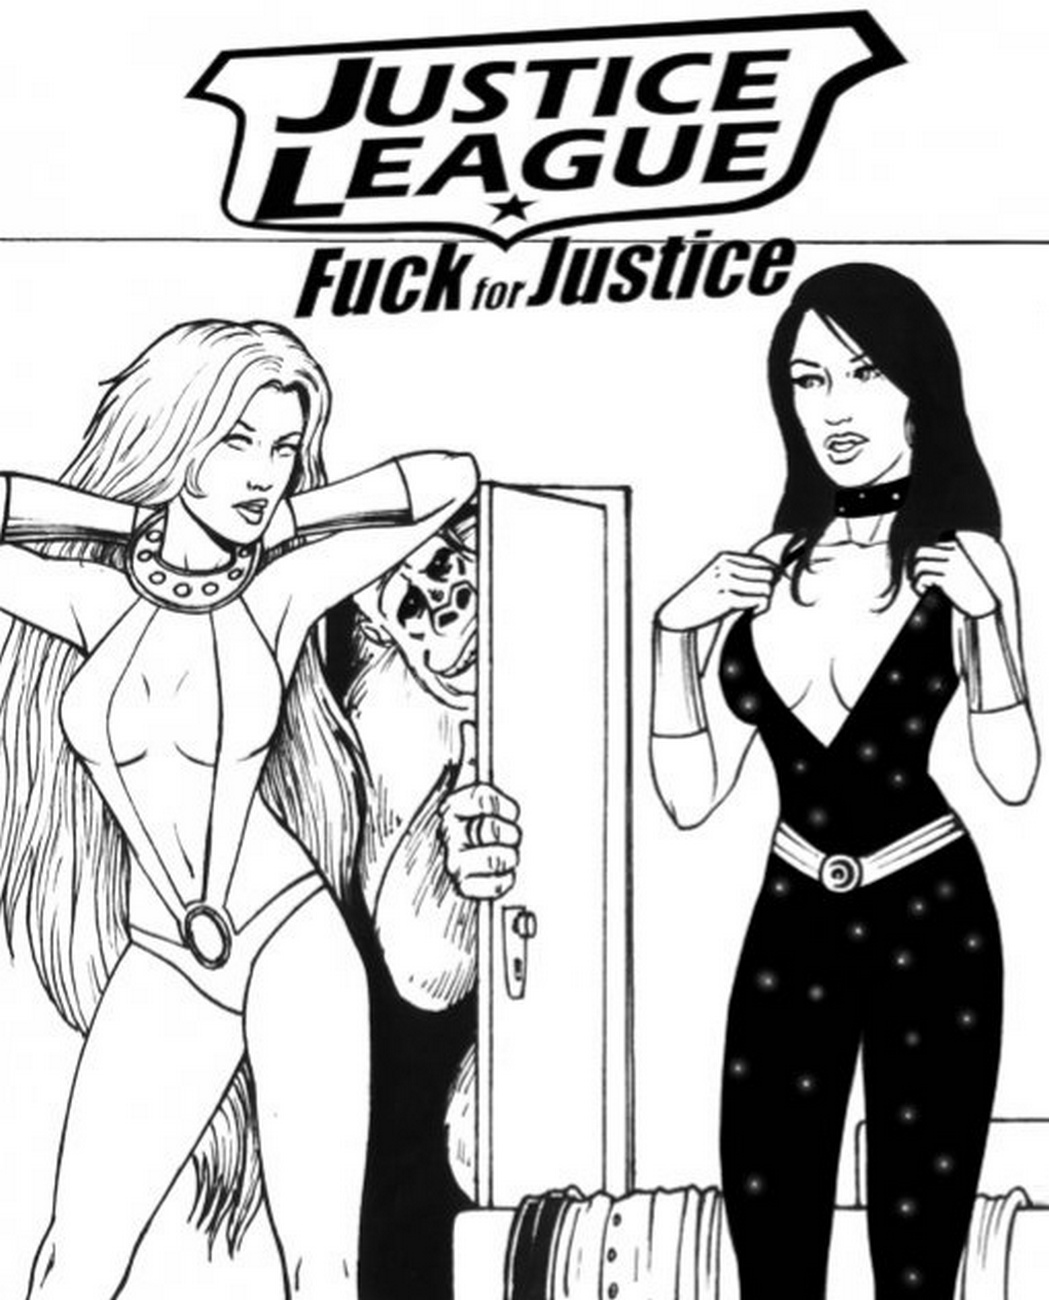 Justice League - Fuck For Justice